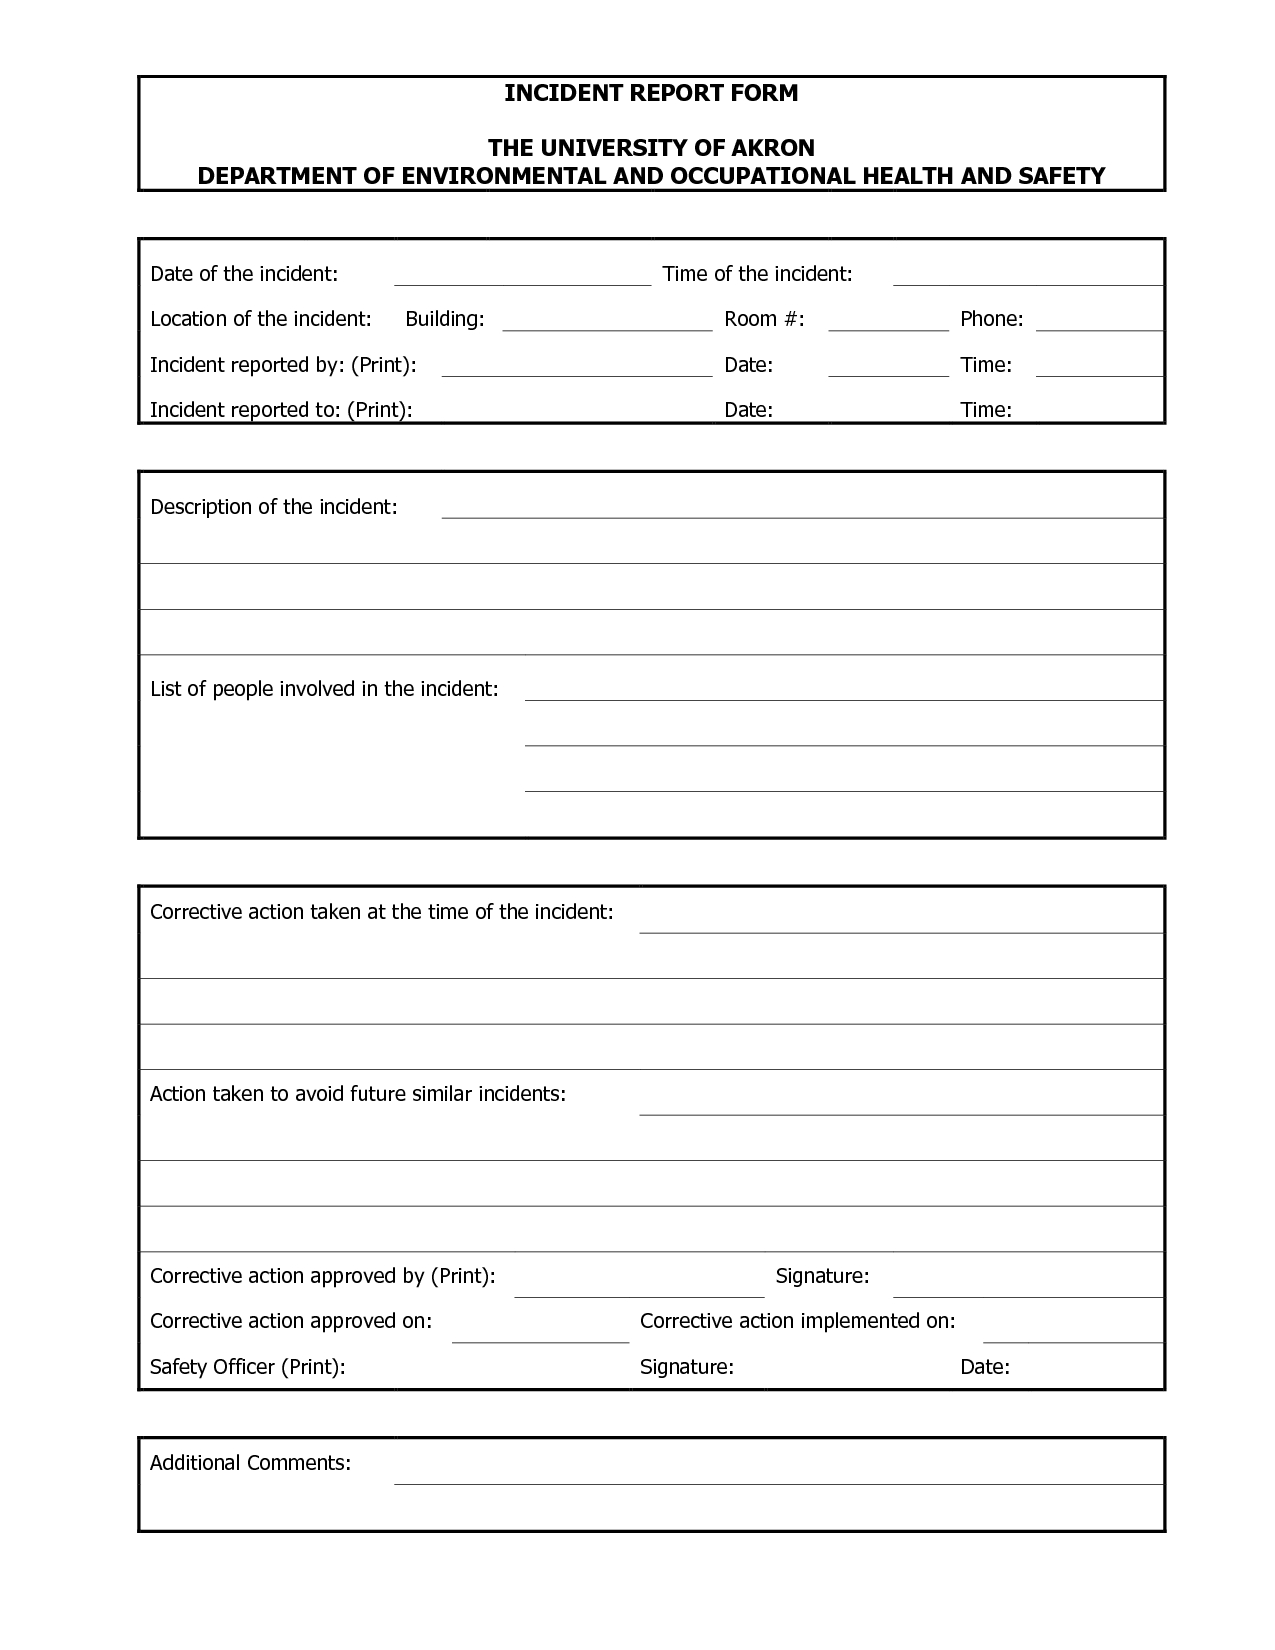 Blank Incident Report Form Template ] – Blank Incident Regarding Incident Report Book Template